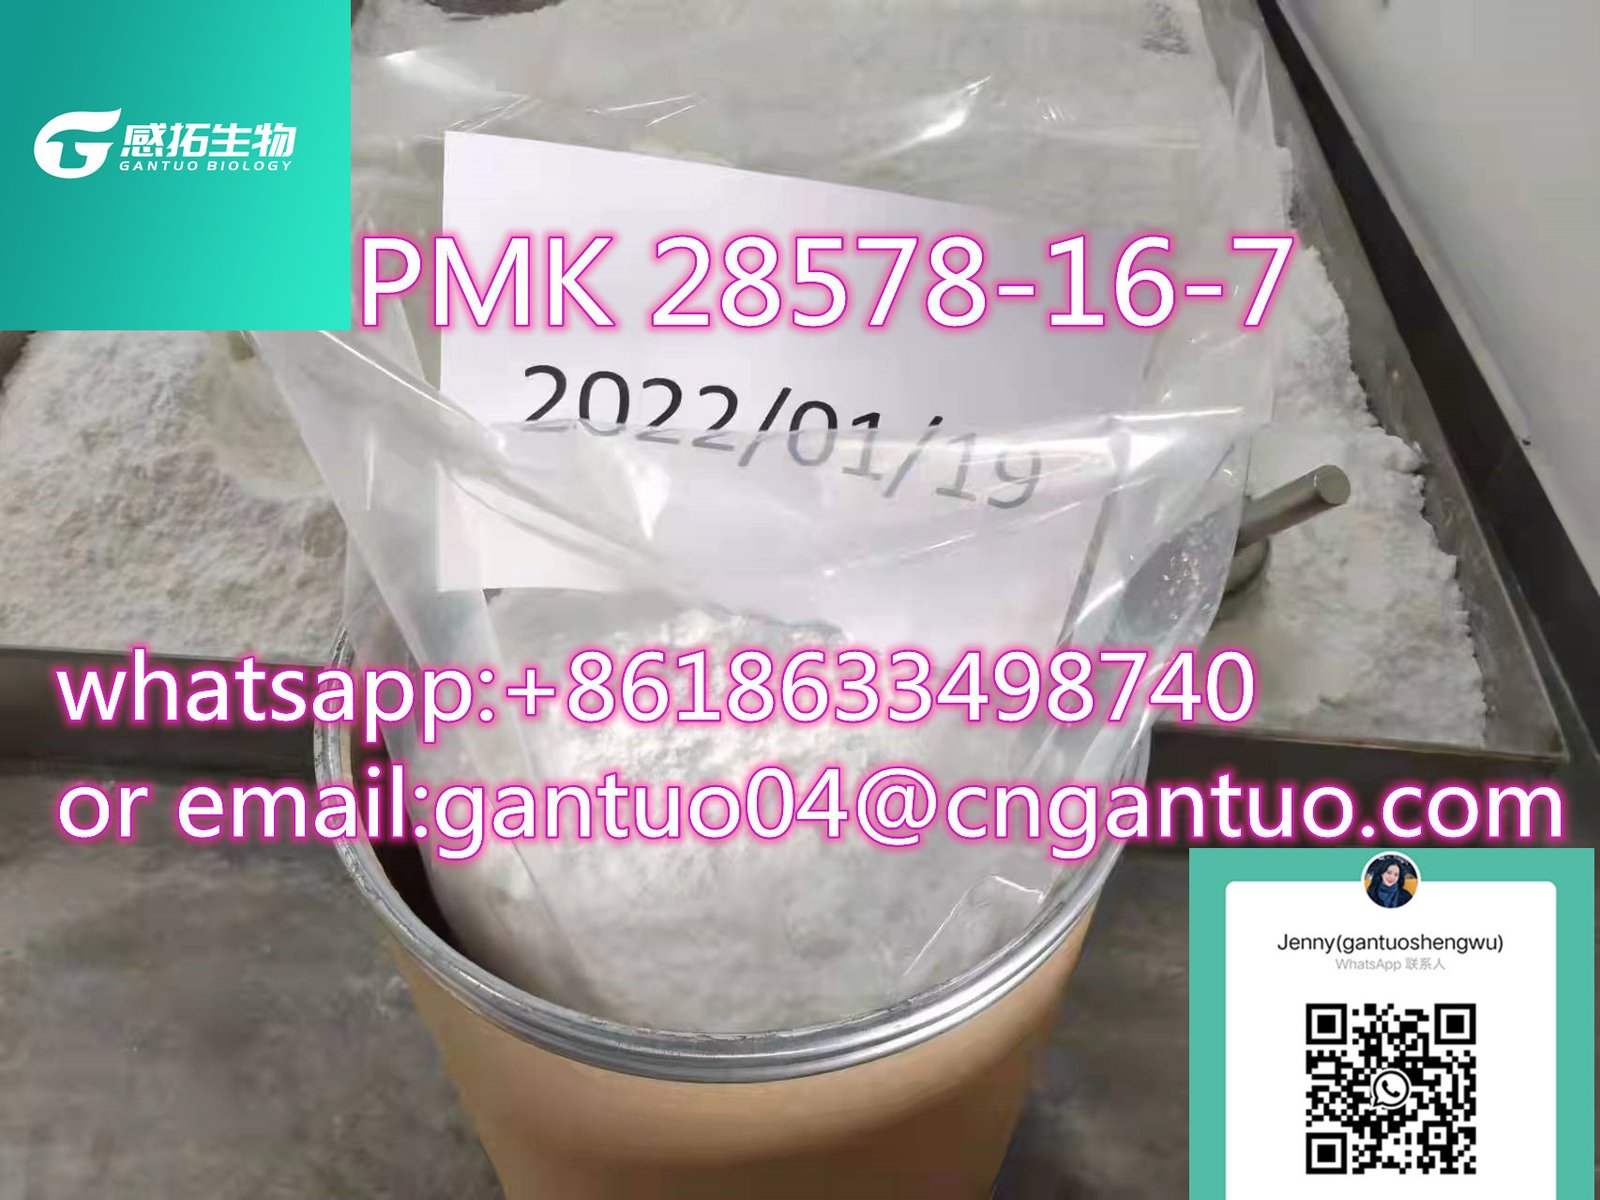 PMK 28578-16-7 of great quality